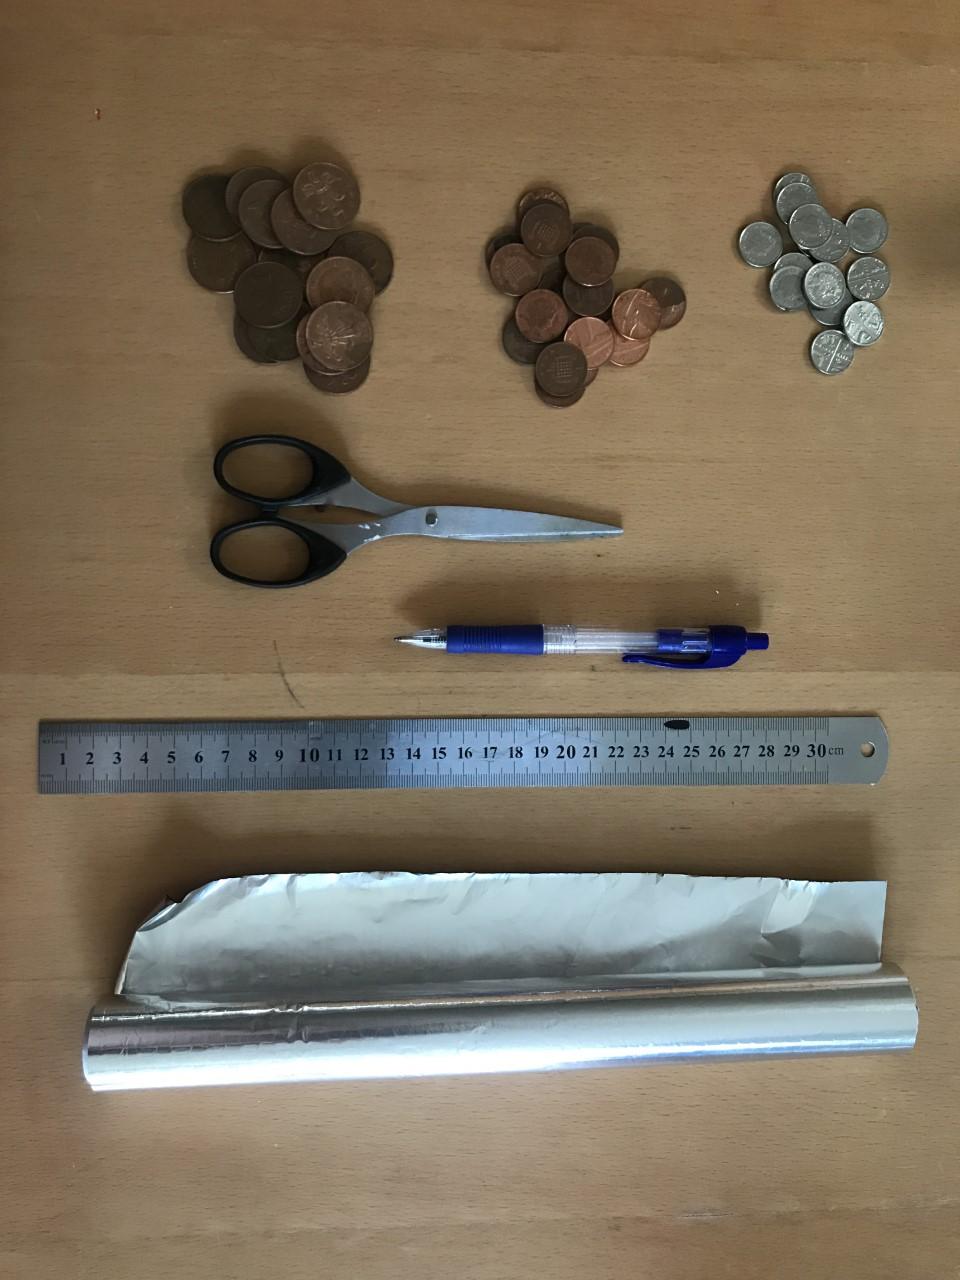 (Source of foil ruler pen scissors and coins picture)